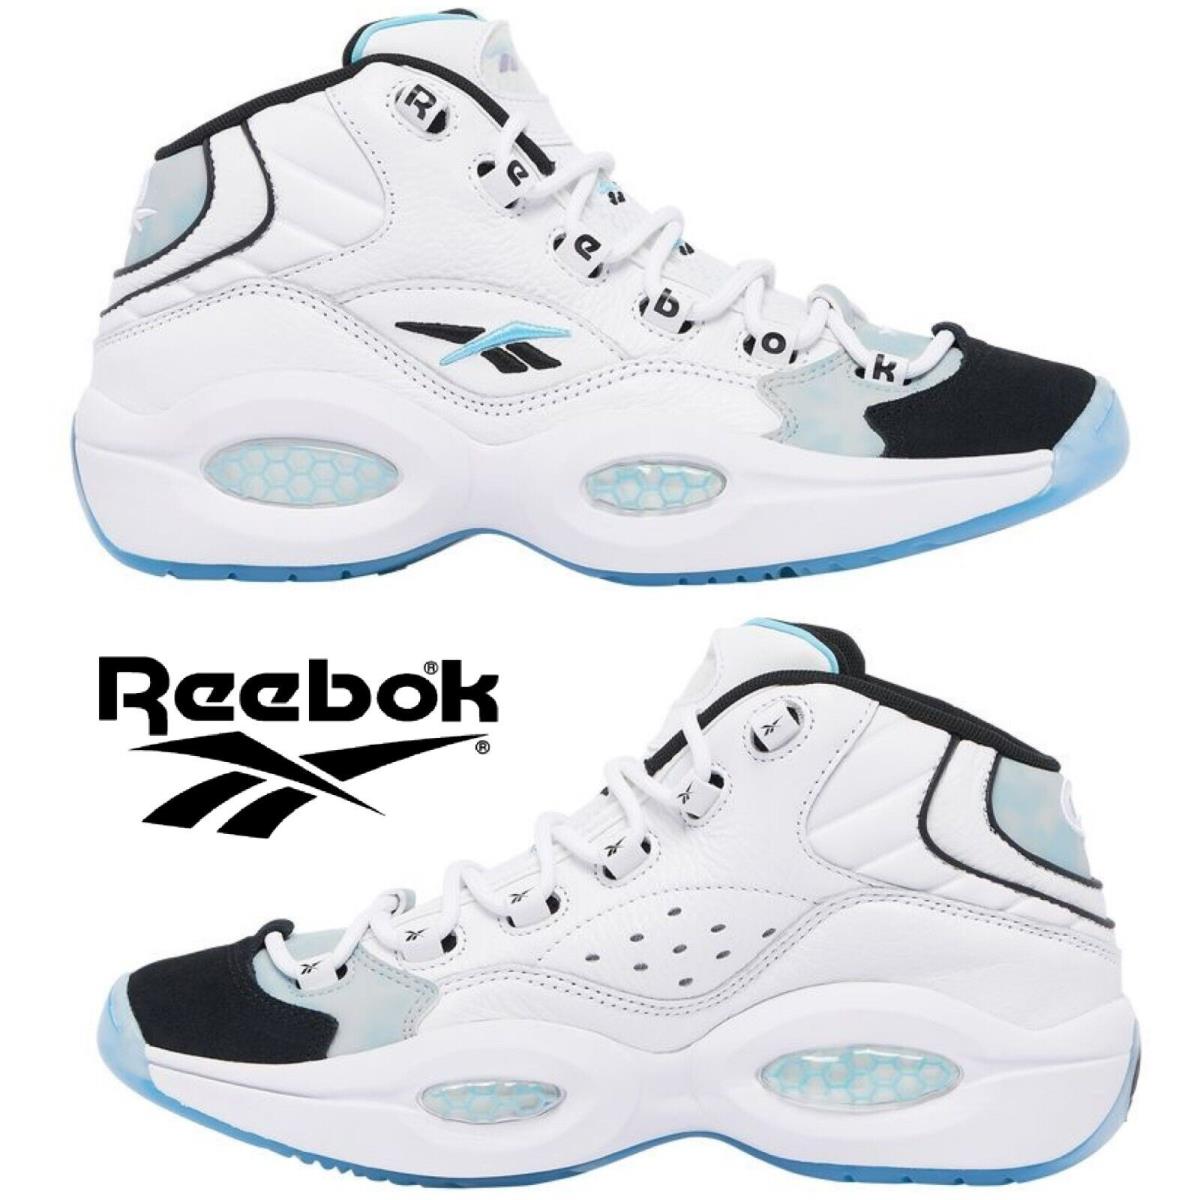 Reebok Question Mid Anuel Double Toe Basketball Shoes Men`s Casual Sneakers